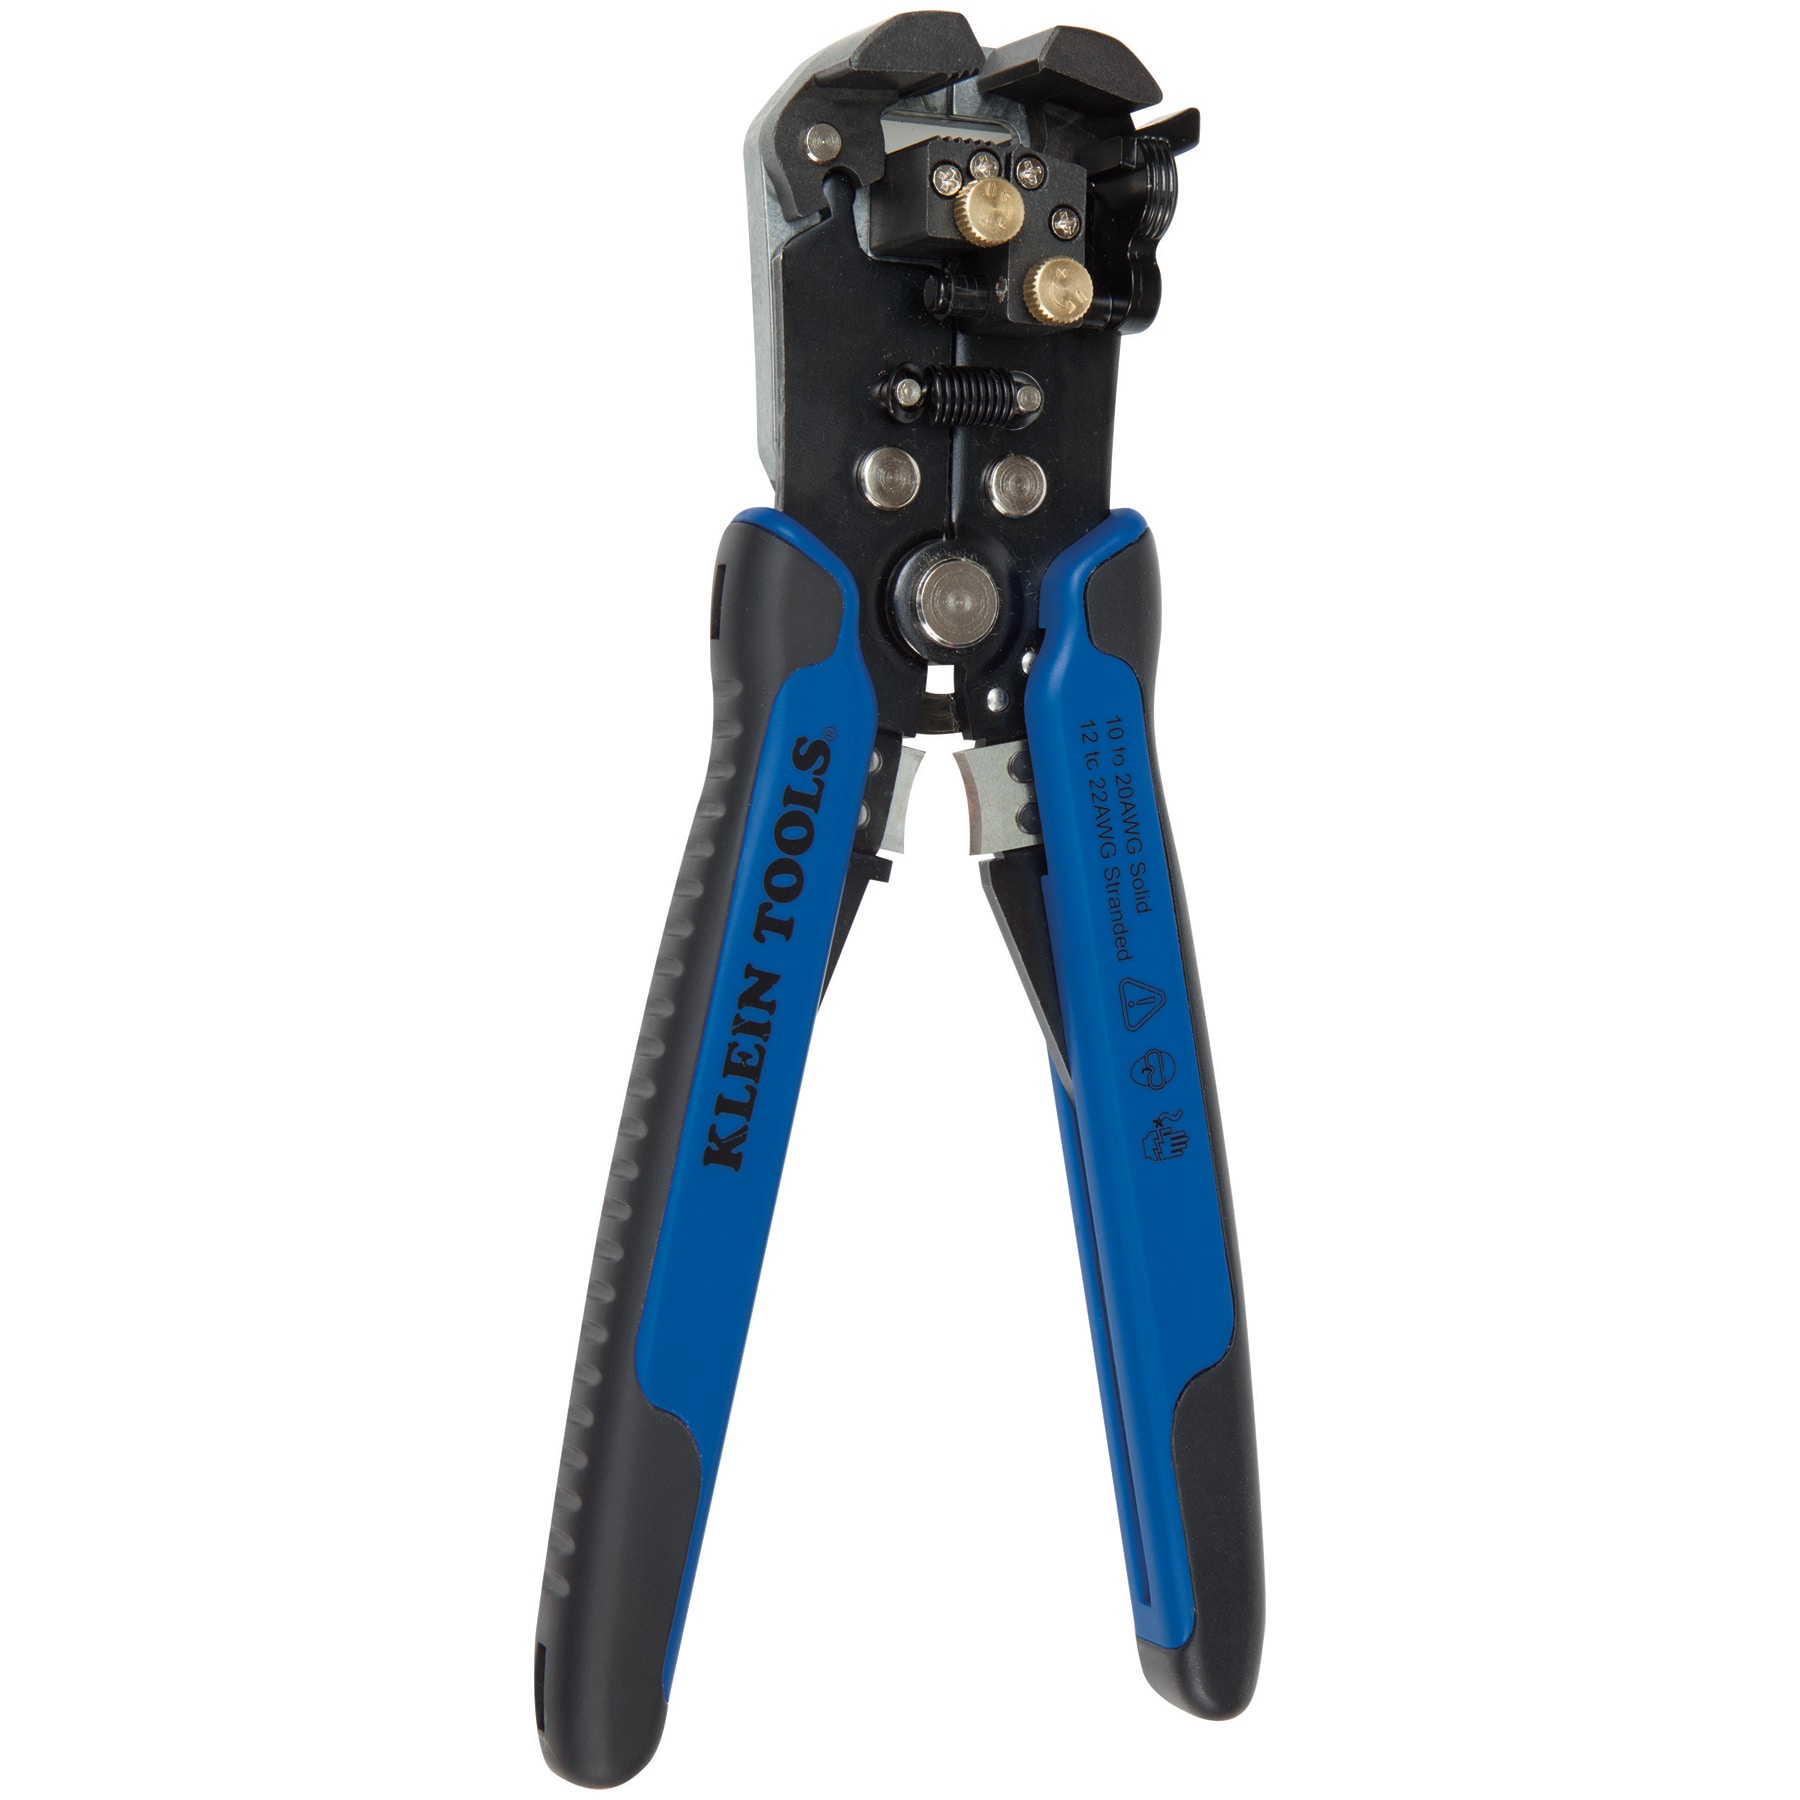 New C.K Cable and Wire Stripping Tools – Fast, Effortless and